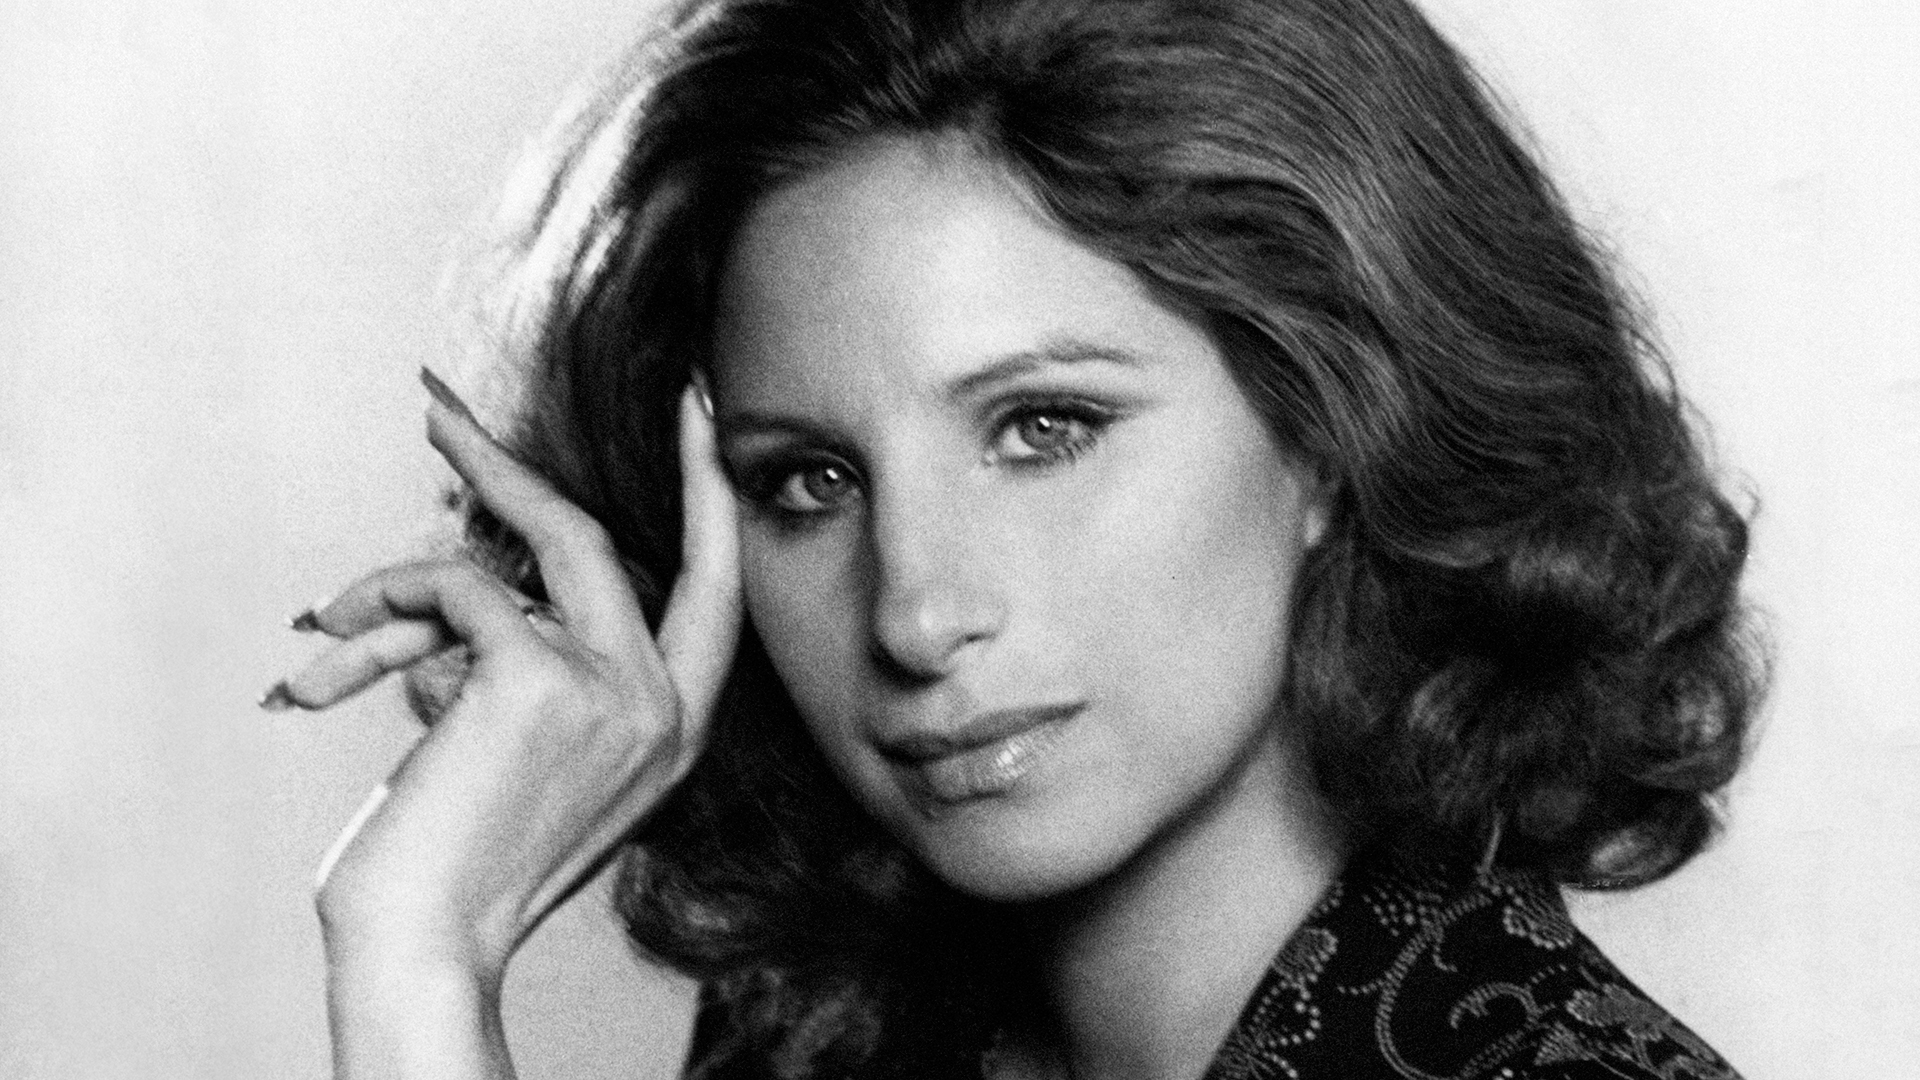 February 2, 1974: "The Way We Were" by Barbra Streisand Hit No. 1 and Went on to Become Billboard's Song of the Year